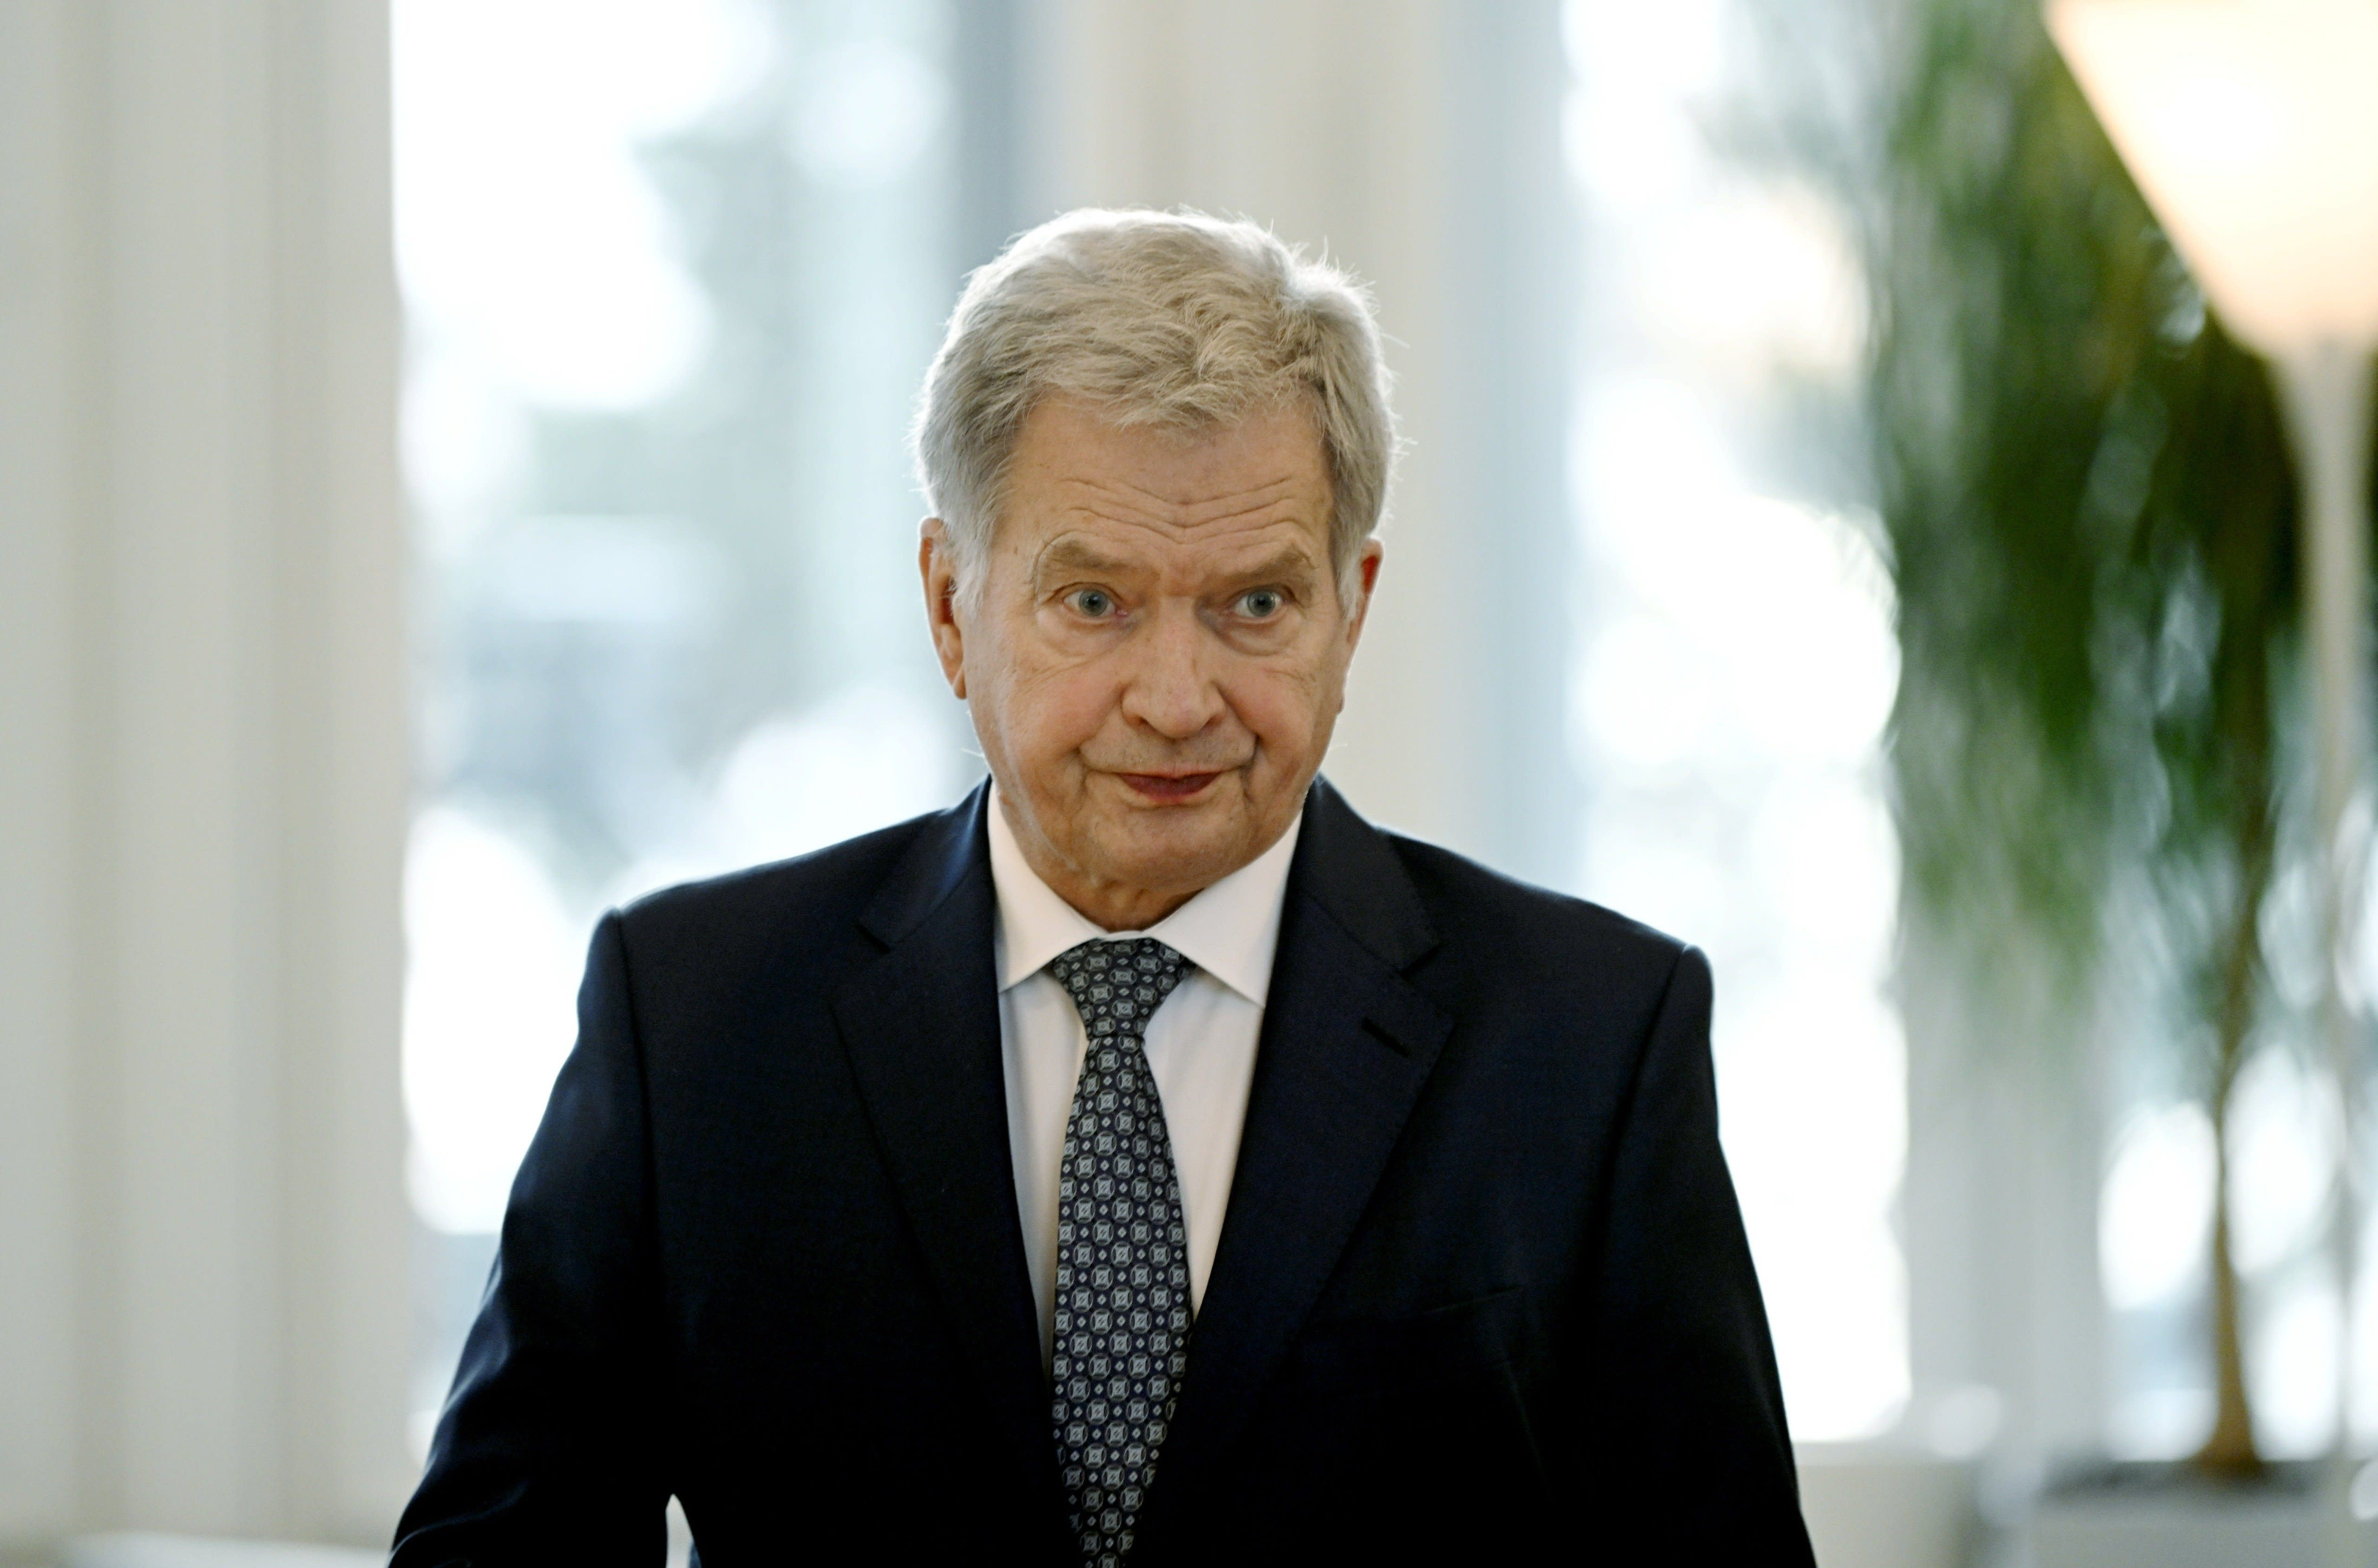 HS: Niinistö is concerned about Finland’s ability to make timely NATO decisions